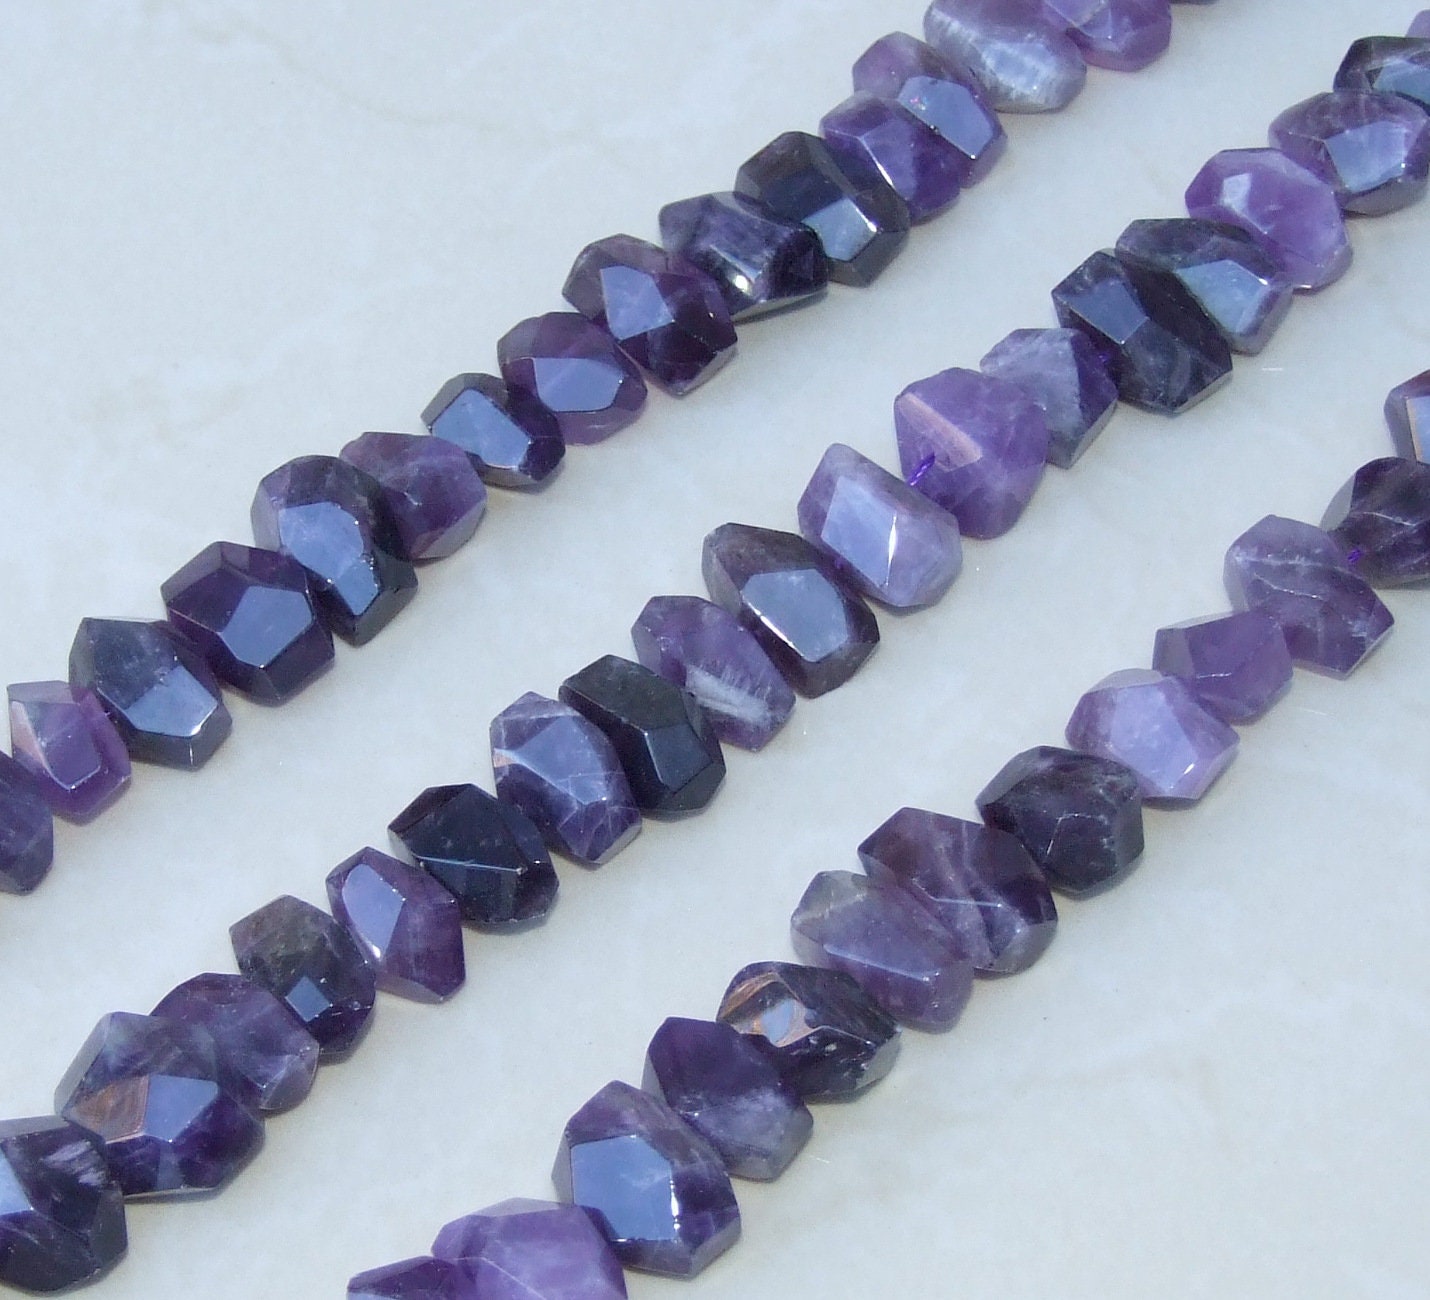 Amethyst Faceted Nugget, Polished Amethyst Beads, Gemstone Beads, Jewelry Stones, Amethyst Nuggets, Half Strand - 12mm x 12mm x 20mm